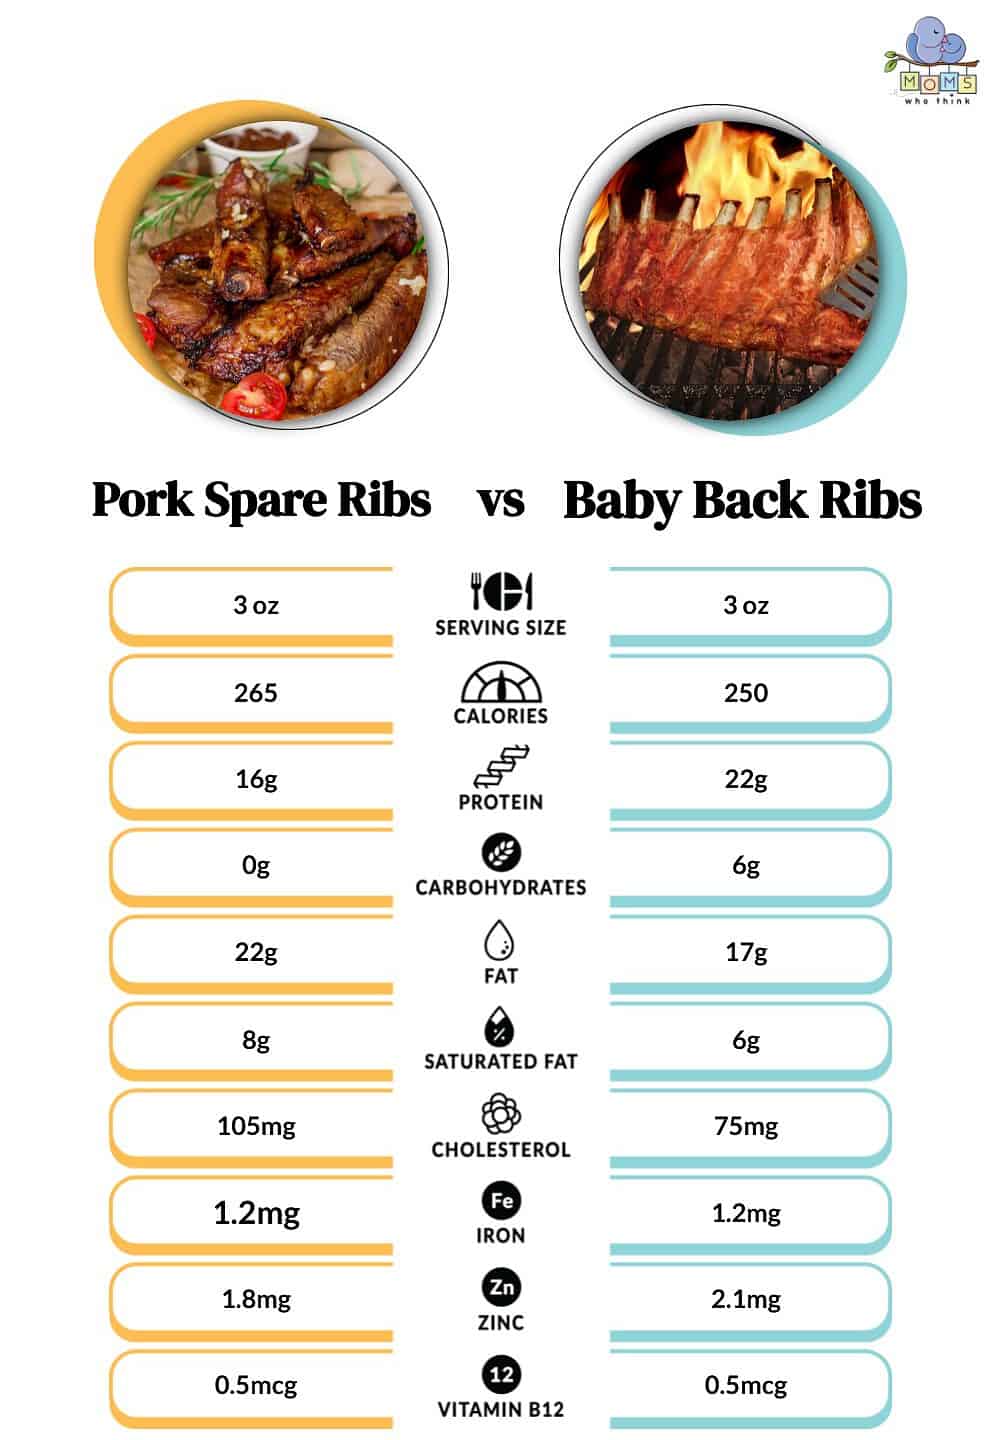 Pork Spare Ribs vs Baby Back Ribs Nutritional Facts